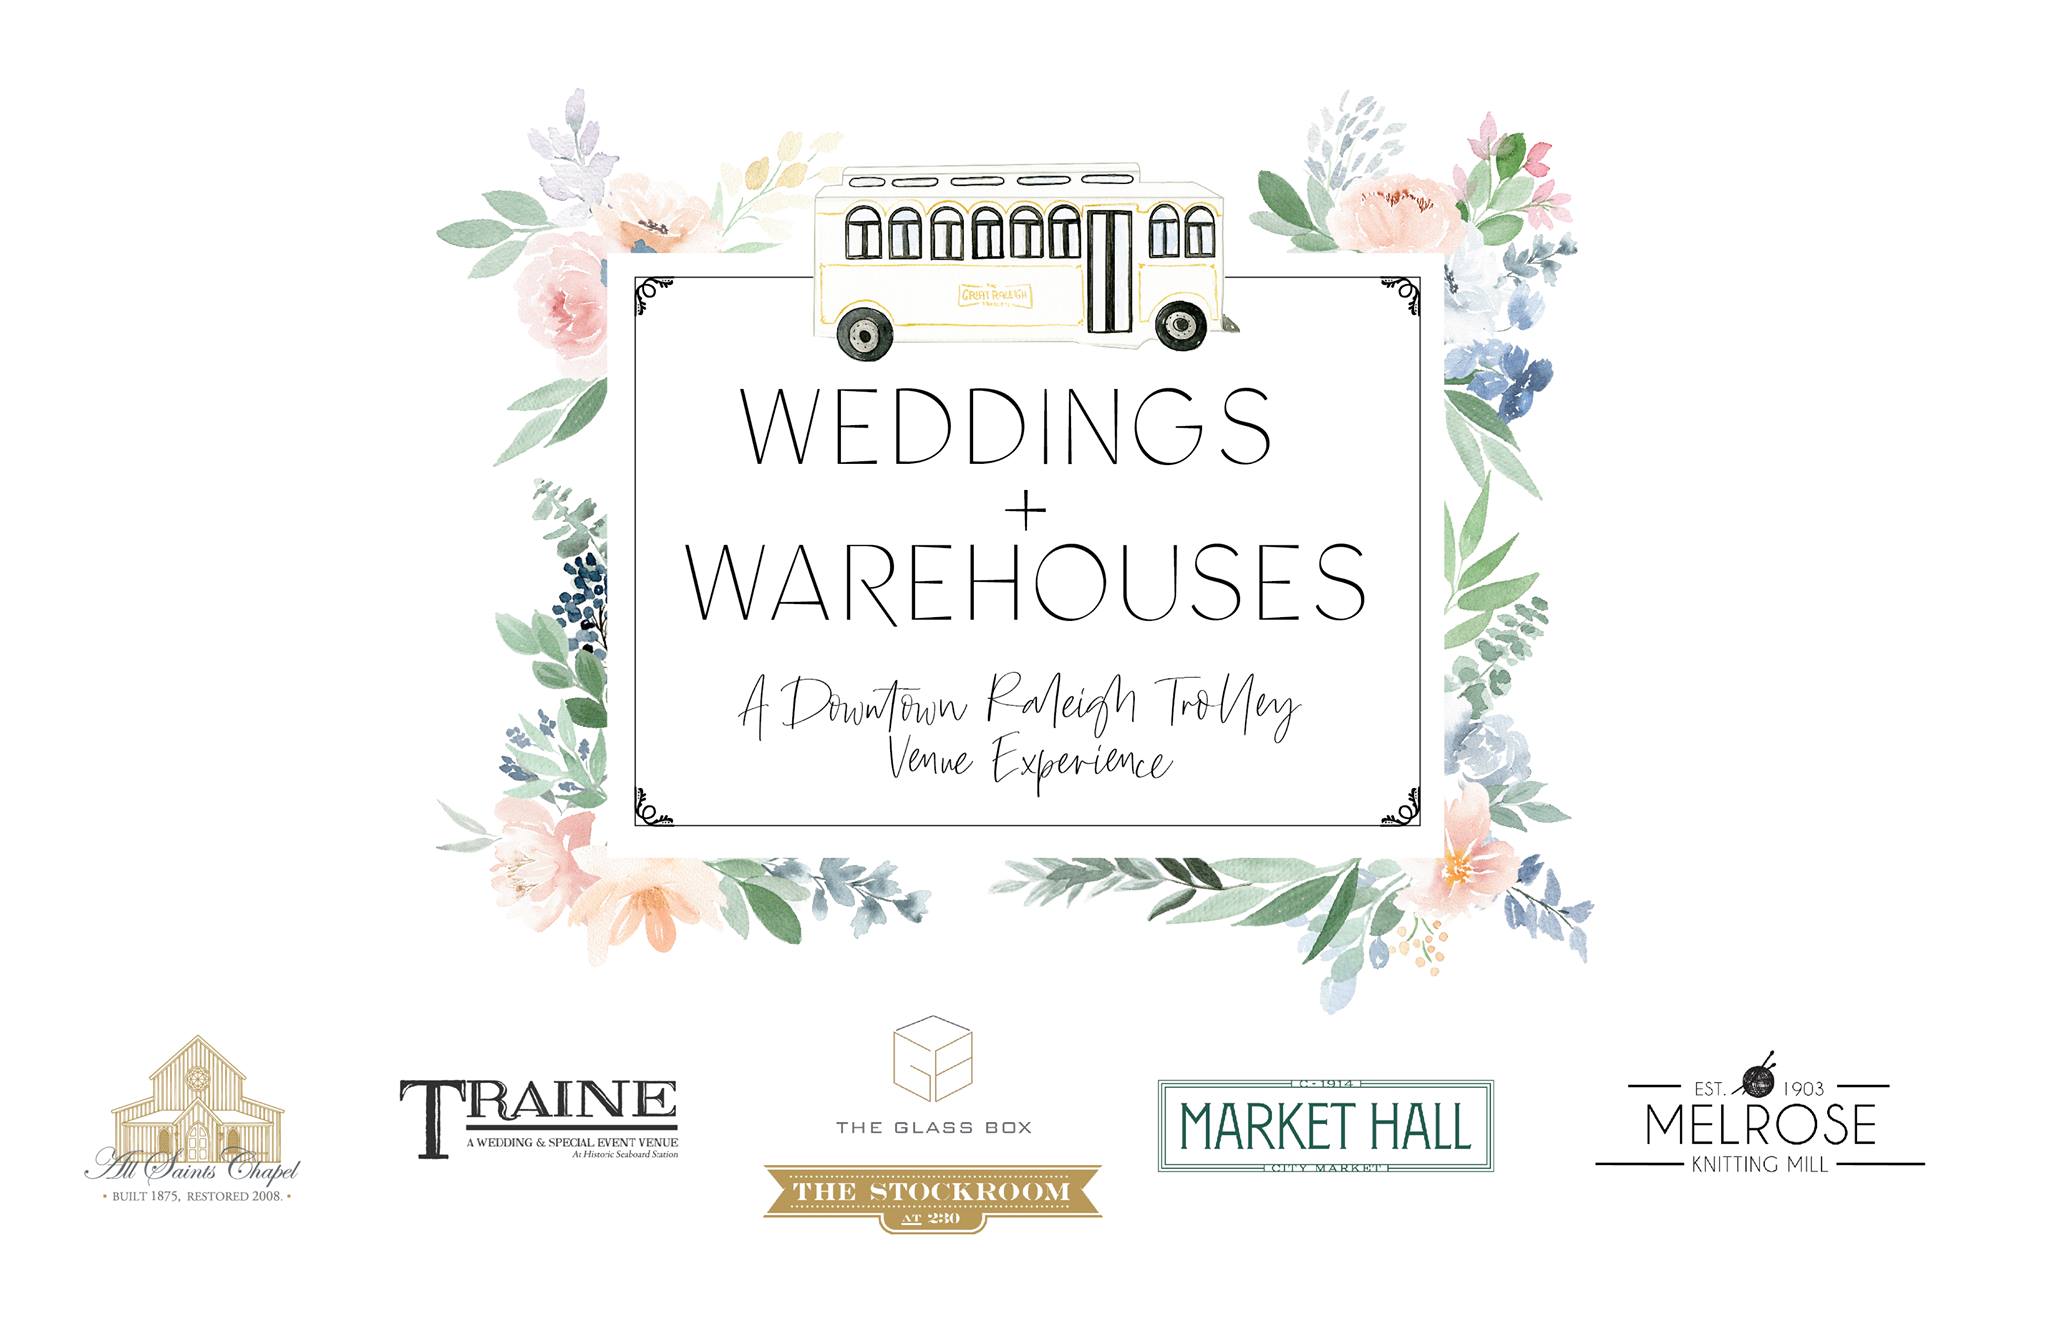 Wedding +Warehouses Featuring Melrose Knitting Mill